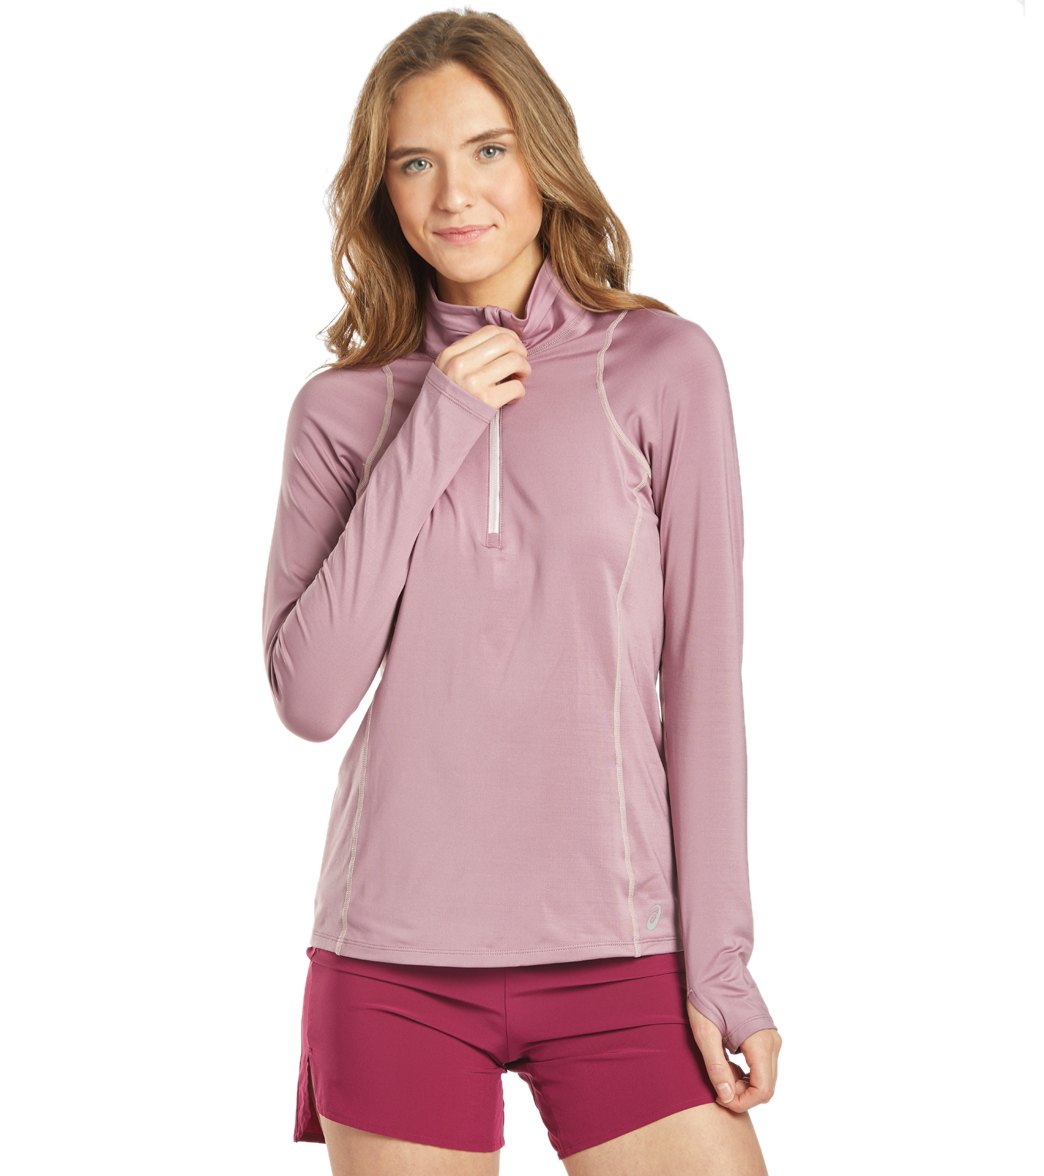 Asics Women's Thermopolis Xp Half Zip Long Sleeve Top - Purple Oxide/Watershed Rose Small Size Small - Swimoutlet.com